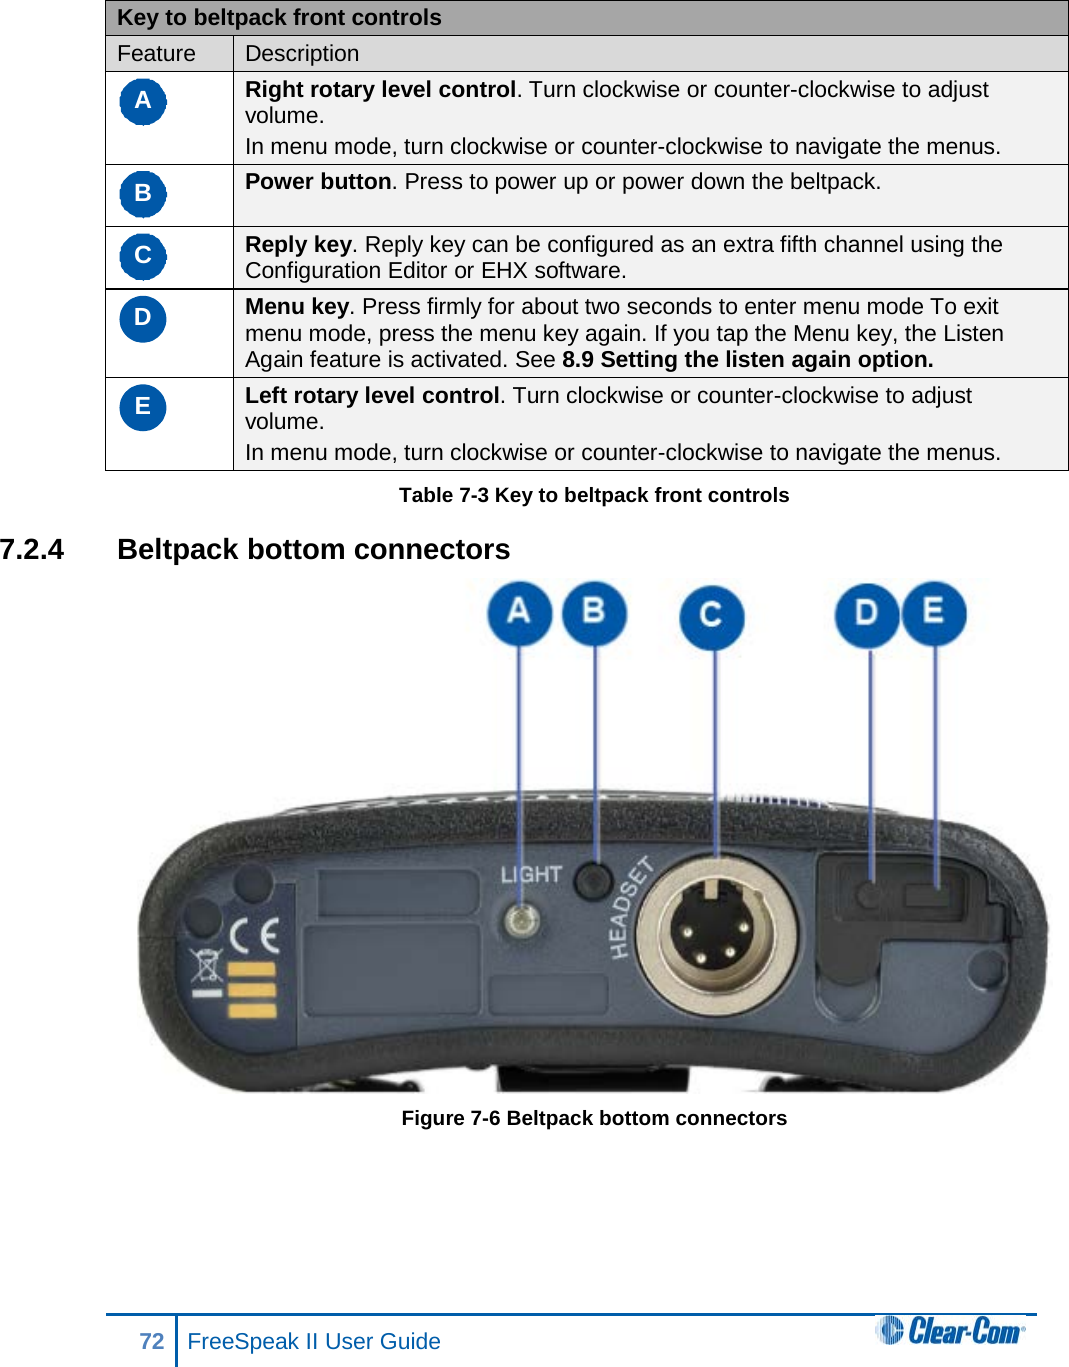  Key to beltpack front controls Feature Description A Right rotary level control. Turn clockwise or counter-clockwise to adjust volume. In menu mode, turn clockwise or counter-clockwise to navigate the menus. B Power button. Press to power up or power down the beltpack. C Reply key. Reply key can be configured as an extra fifth channel using the Configuration Editor or EHX software. D Menu key. Press firmly for about two seconds to enter menu mode To exit menu mode, press the menu key again. If you tap the Menu key, the Listen Again feature is activated. See 8.9 Setting the listen again option. E Left rotary level control. Turn clockwise or counter-clockwise to adjust volume. In menu mode, turn clockwise or counter-clockwise to navigate the menus. Table 7-3 Key to beltpack front controls 7.2.4 Beltpack bottom connectors  Figure 7-6 Beltpack bottom connectors     72 FreeSpeak II User Guide  